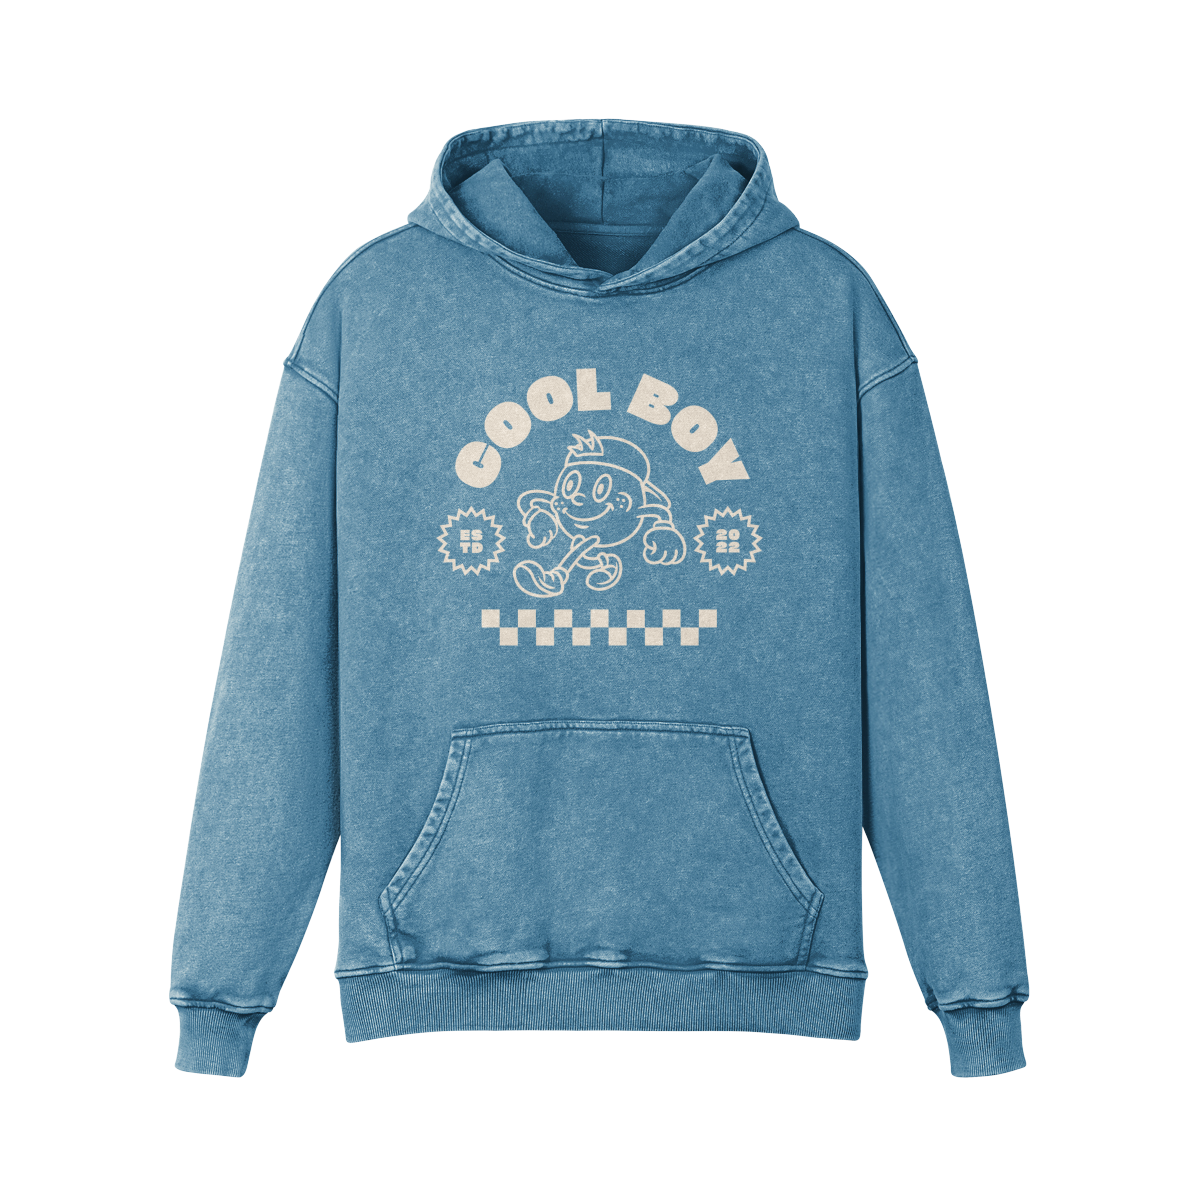 Oversized Hoodie with Cool Boy logo